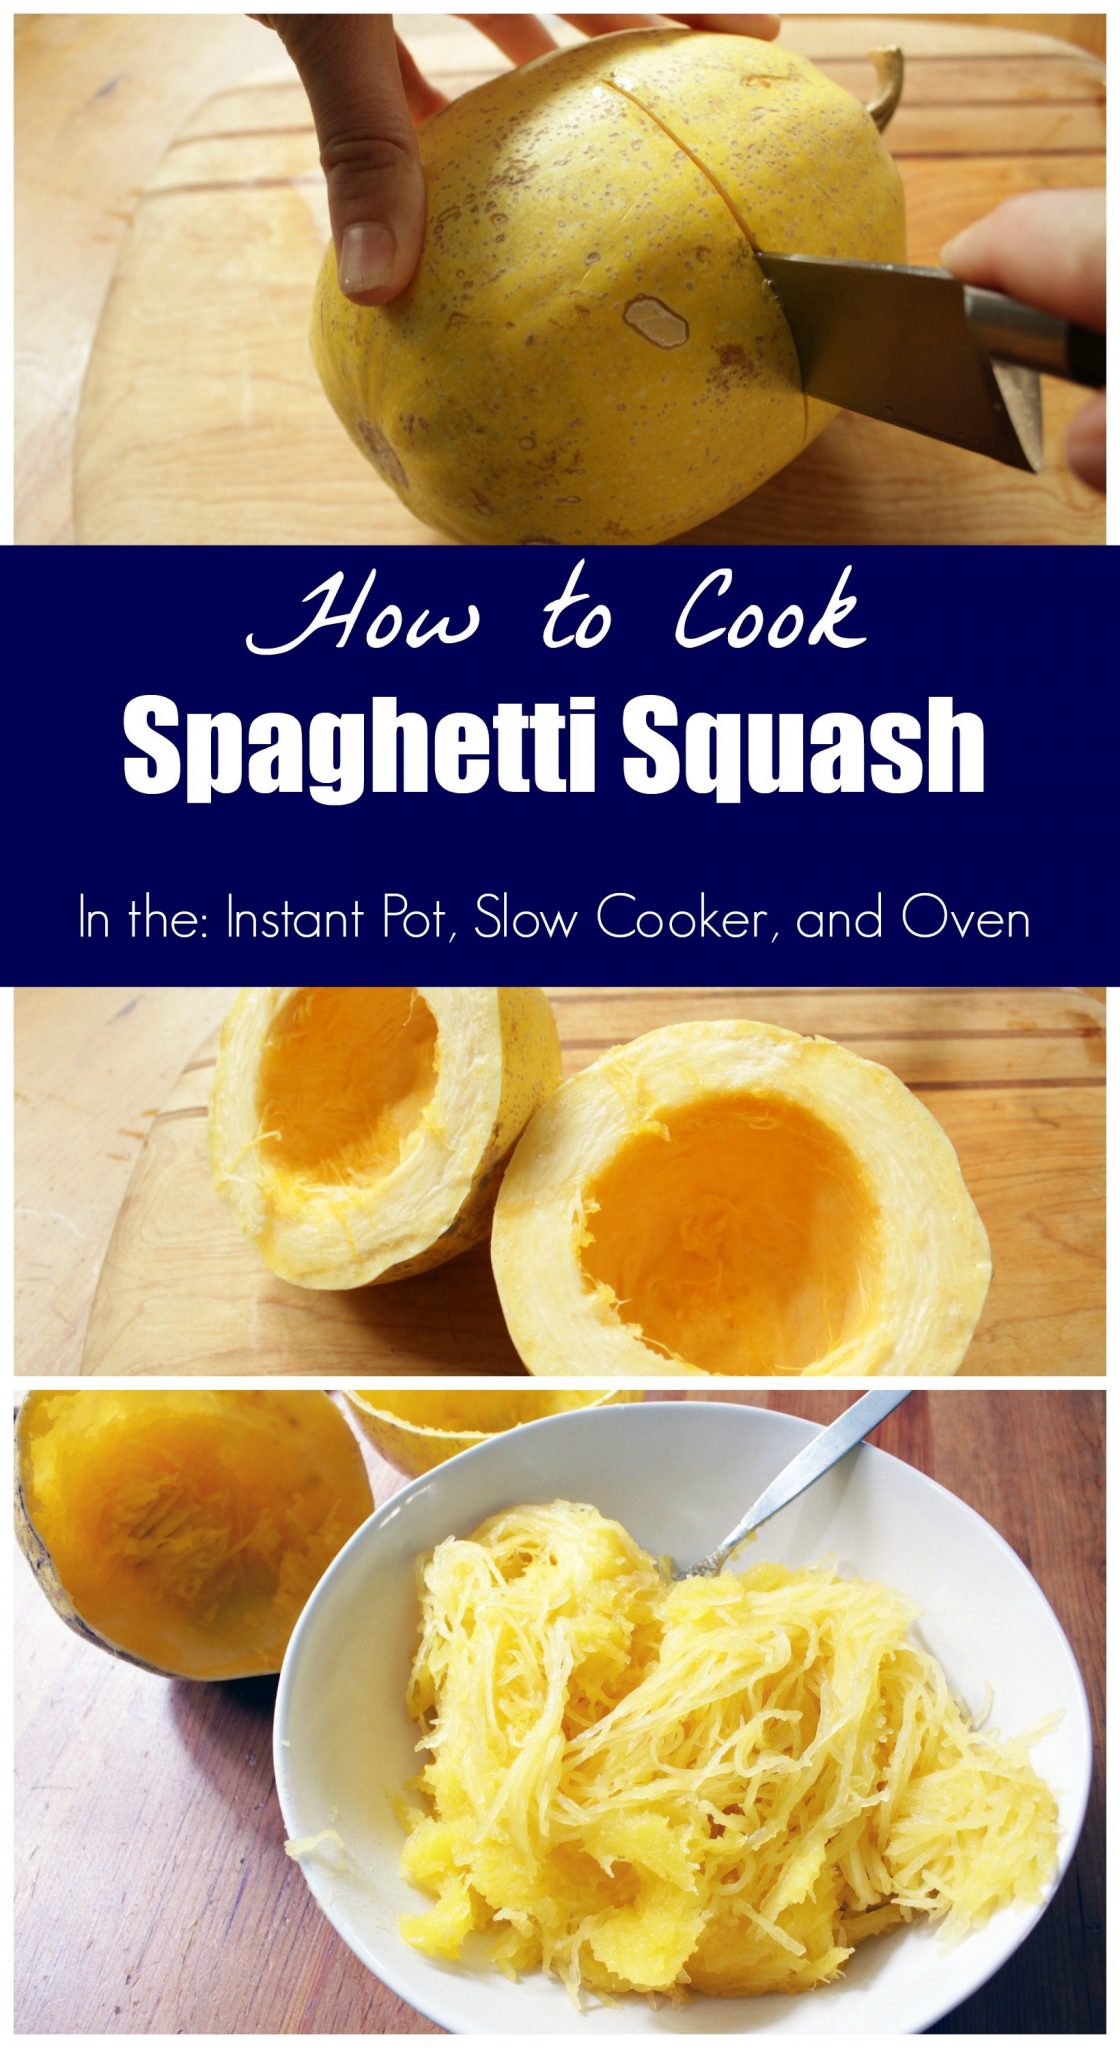 How to Cook Spaghetti Squash in the Instant Pot, Slow Cooker, and Oven